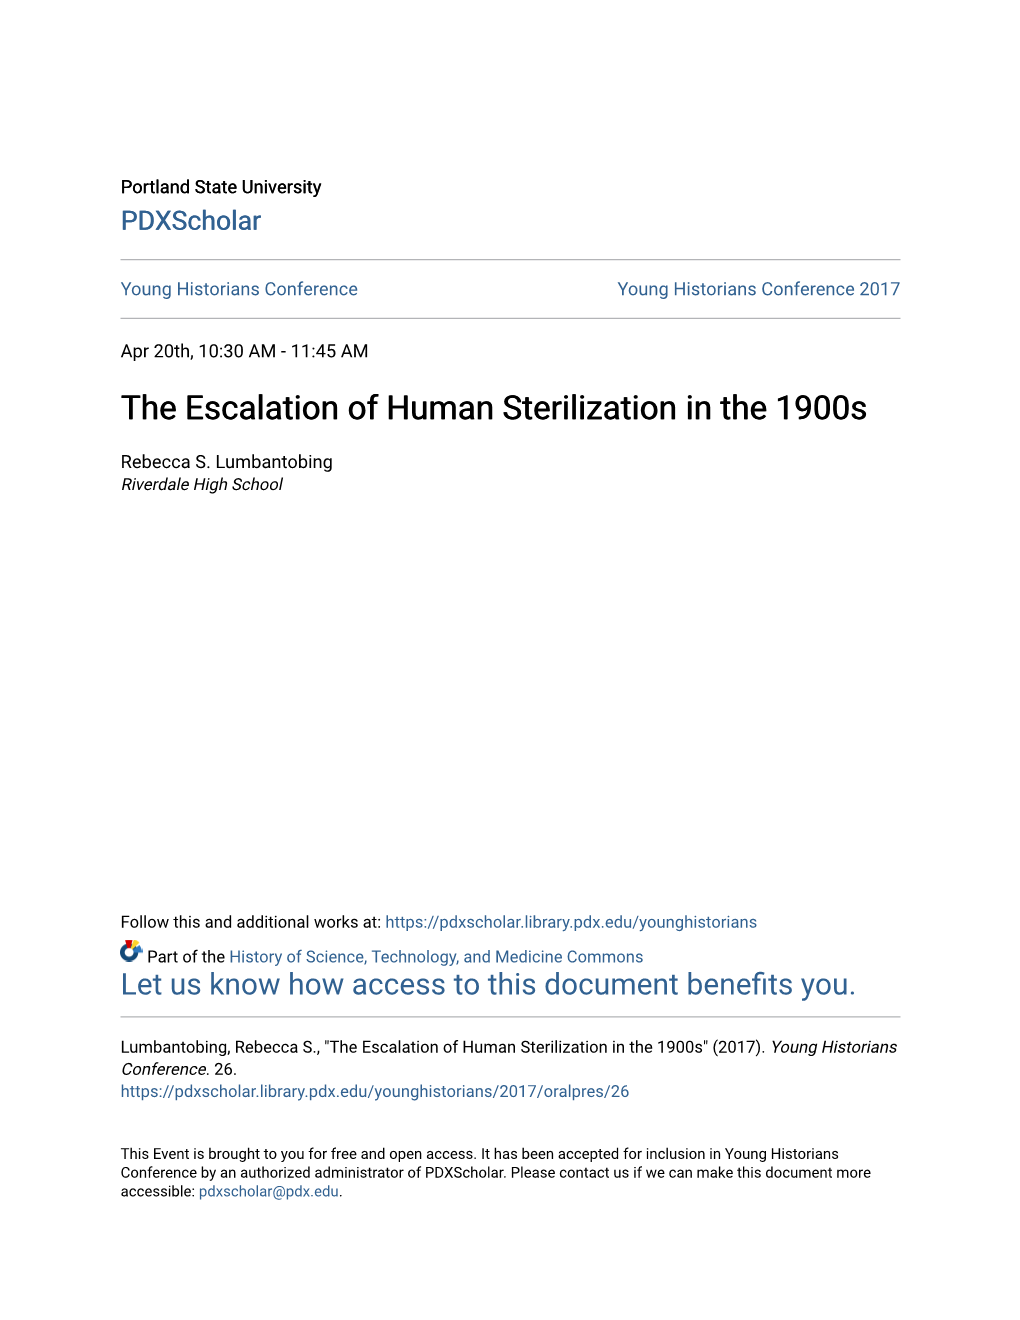 The Escalation of Human Sterilization in the 1900S